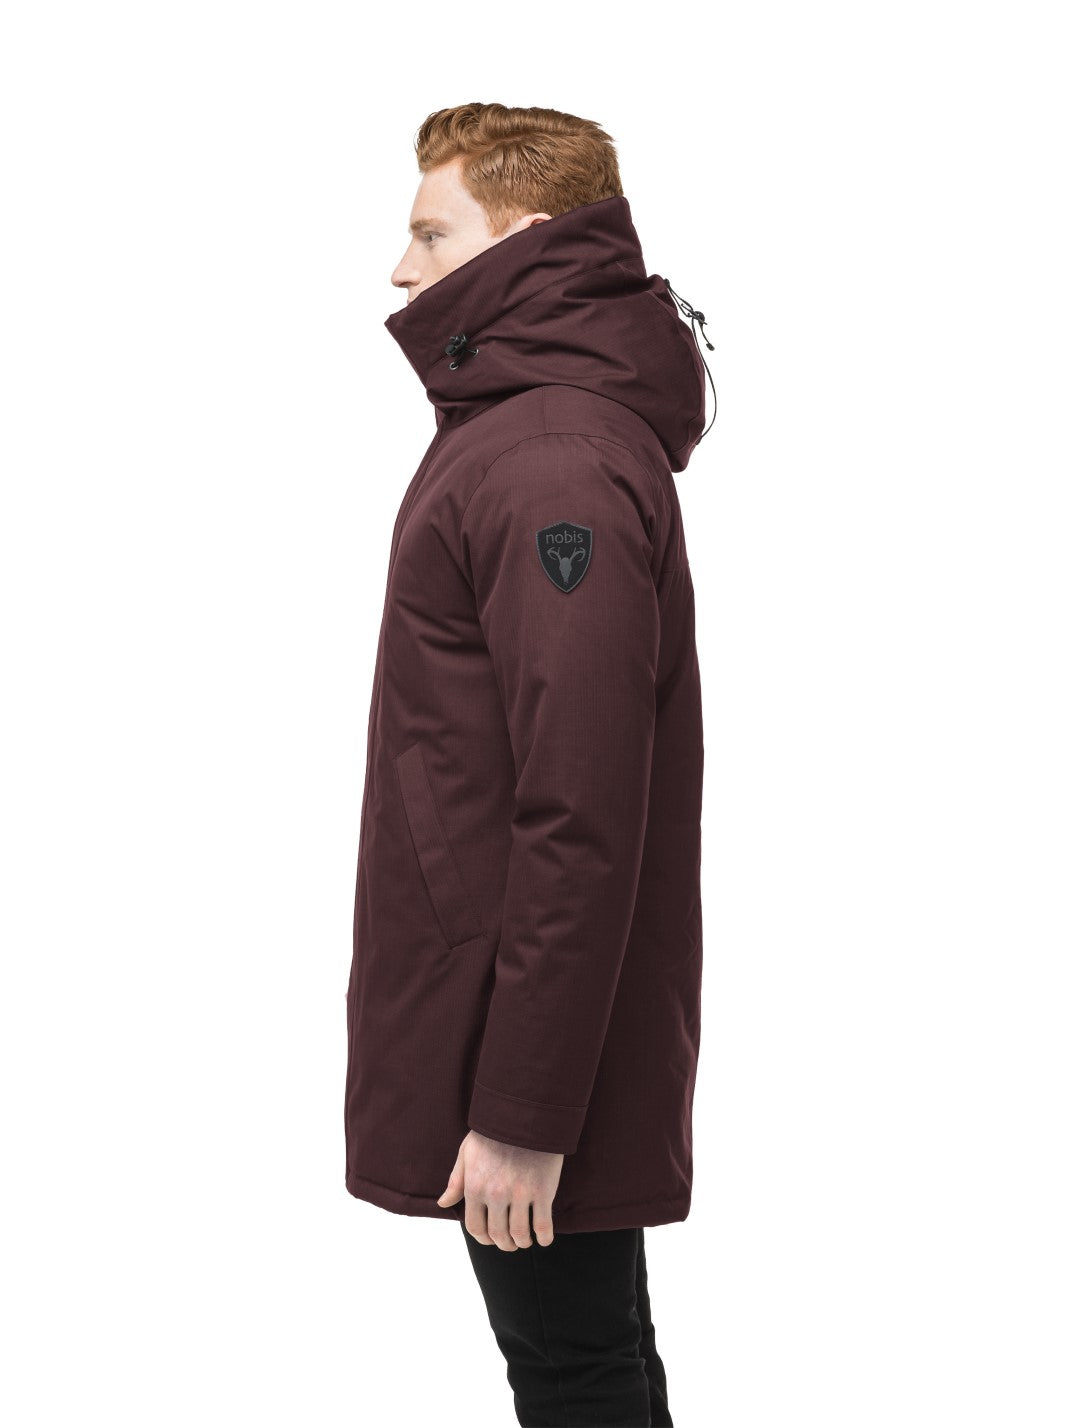 Pierre Men's Jacket in thigh length, Canadian white duck down insulation, non-removable down-filled hood, angled waist pockets, centre-front zipper with wind flap, and elastic ribbed cuffs, in Merlot